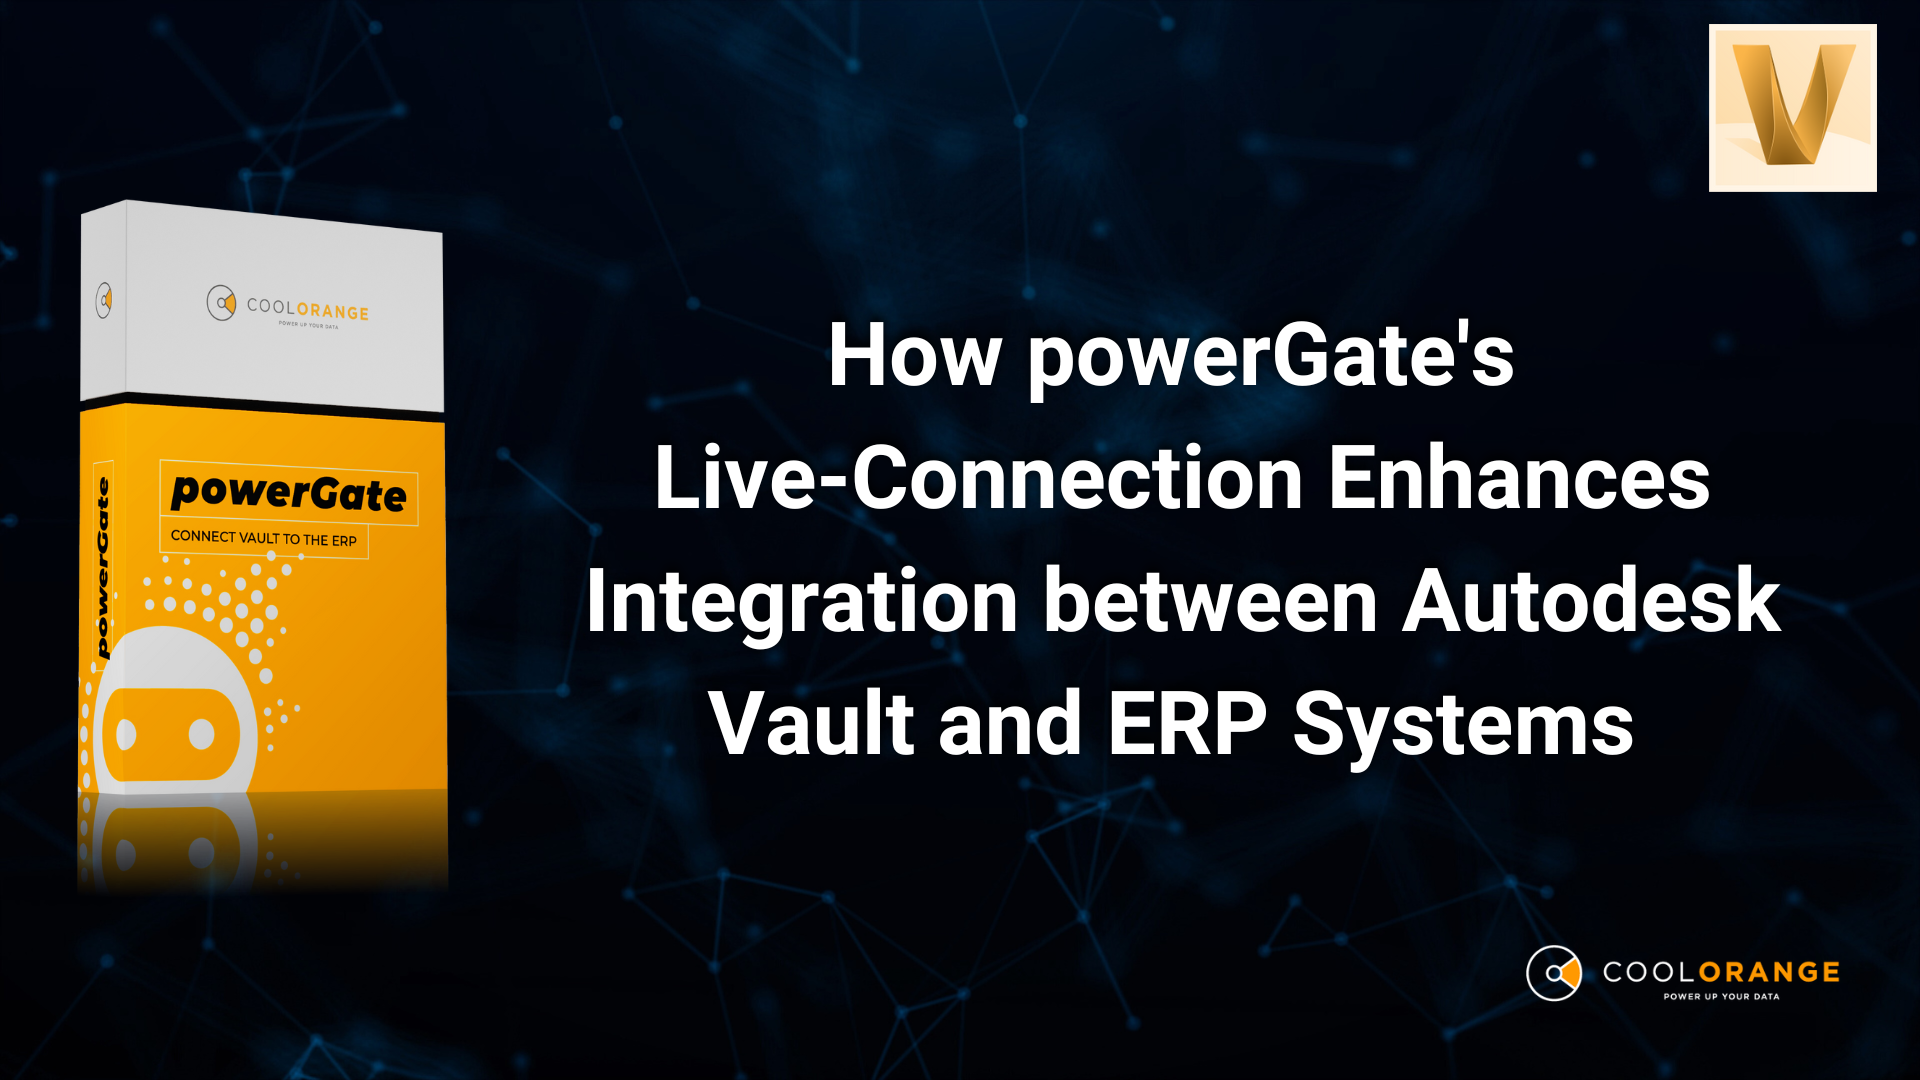 Copy of Why your business needs a Vault-ERP Integration through powerGate